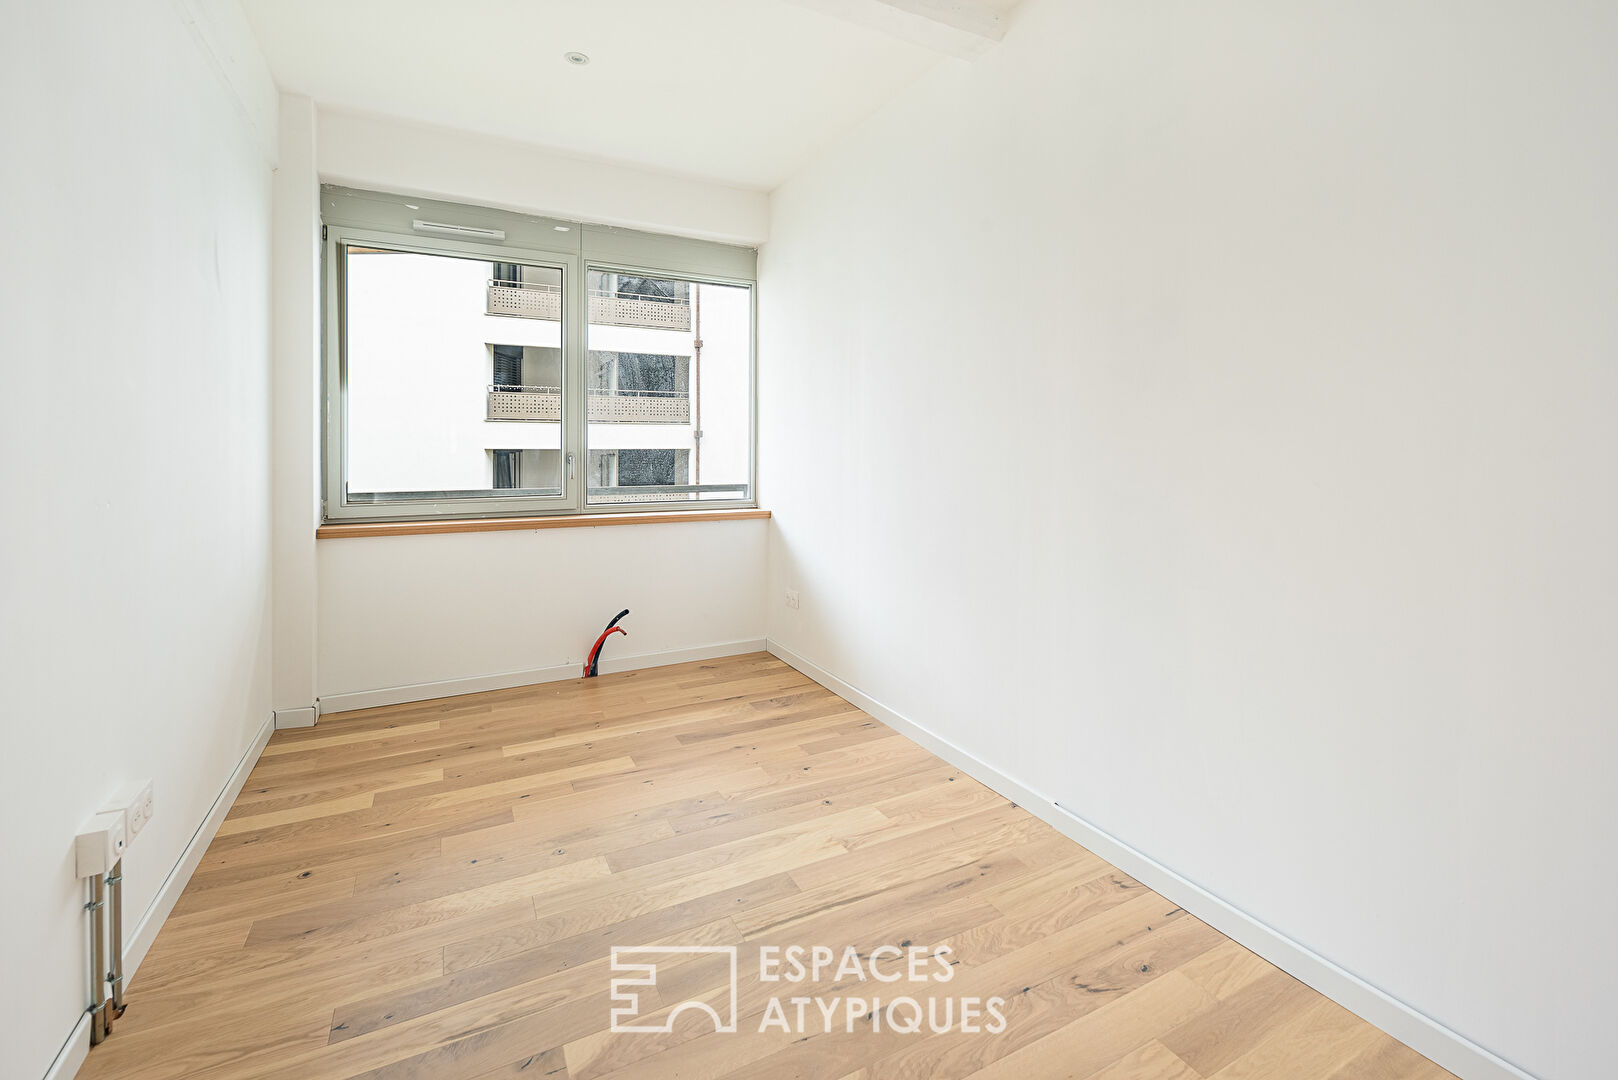 Already rented : Duplex apartment and terrace in the heart of Les Deux Rives